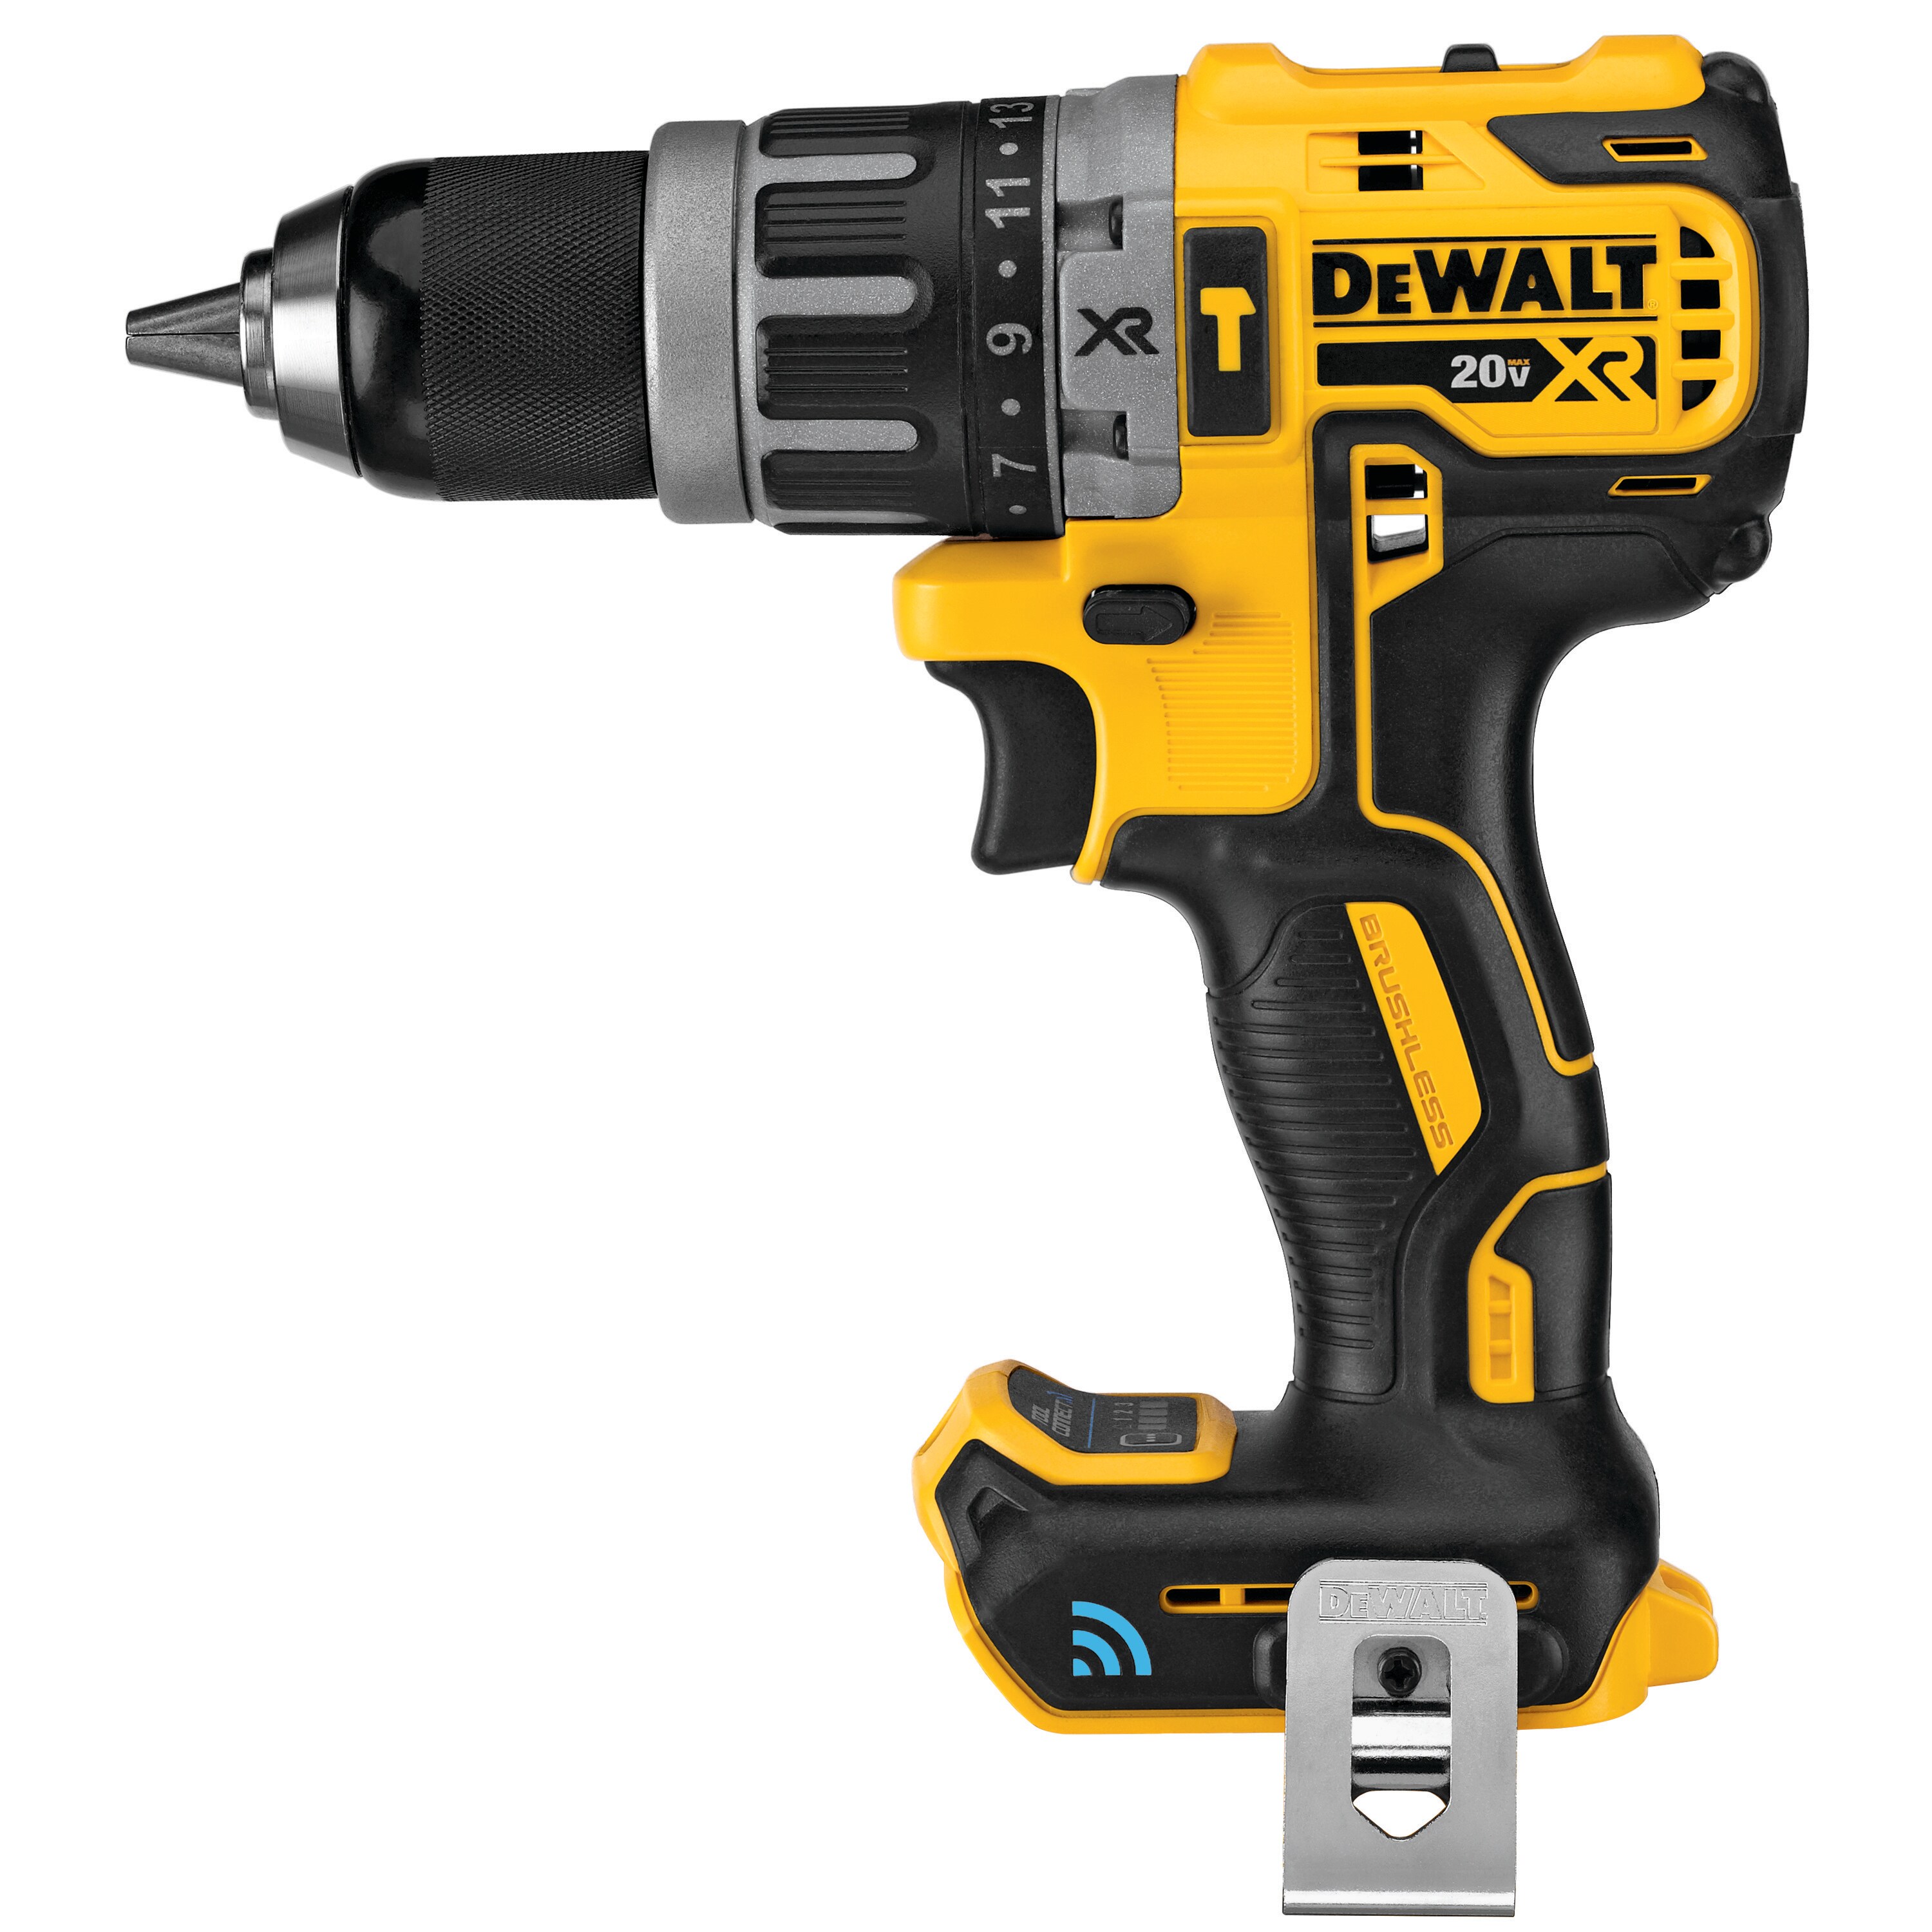 Details about   DEWALT DCD796 20V Brushless 1/2" Compact Hammer Drill w/ 2 Ah Battery & Charger 